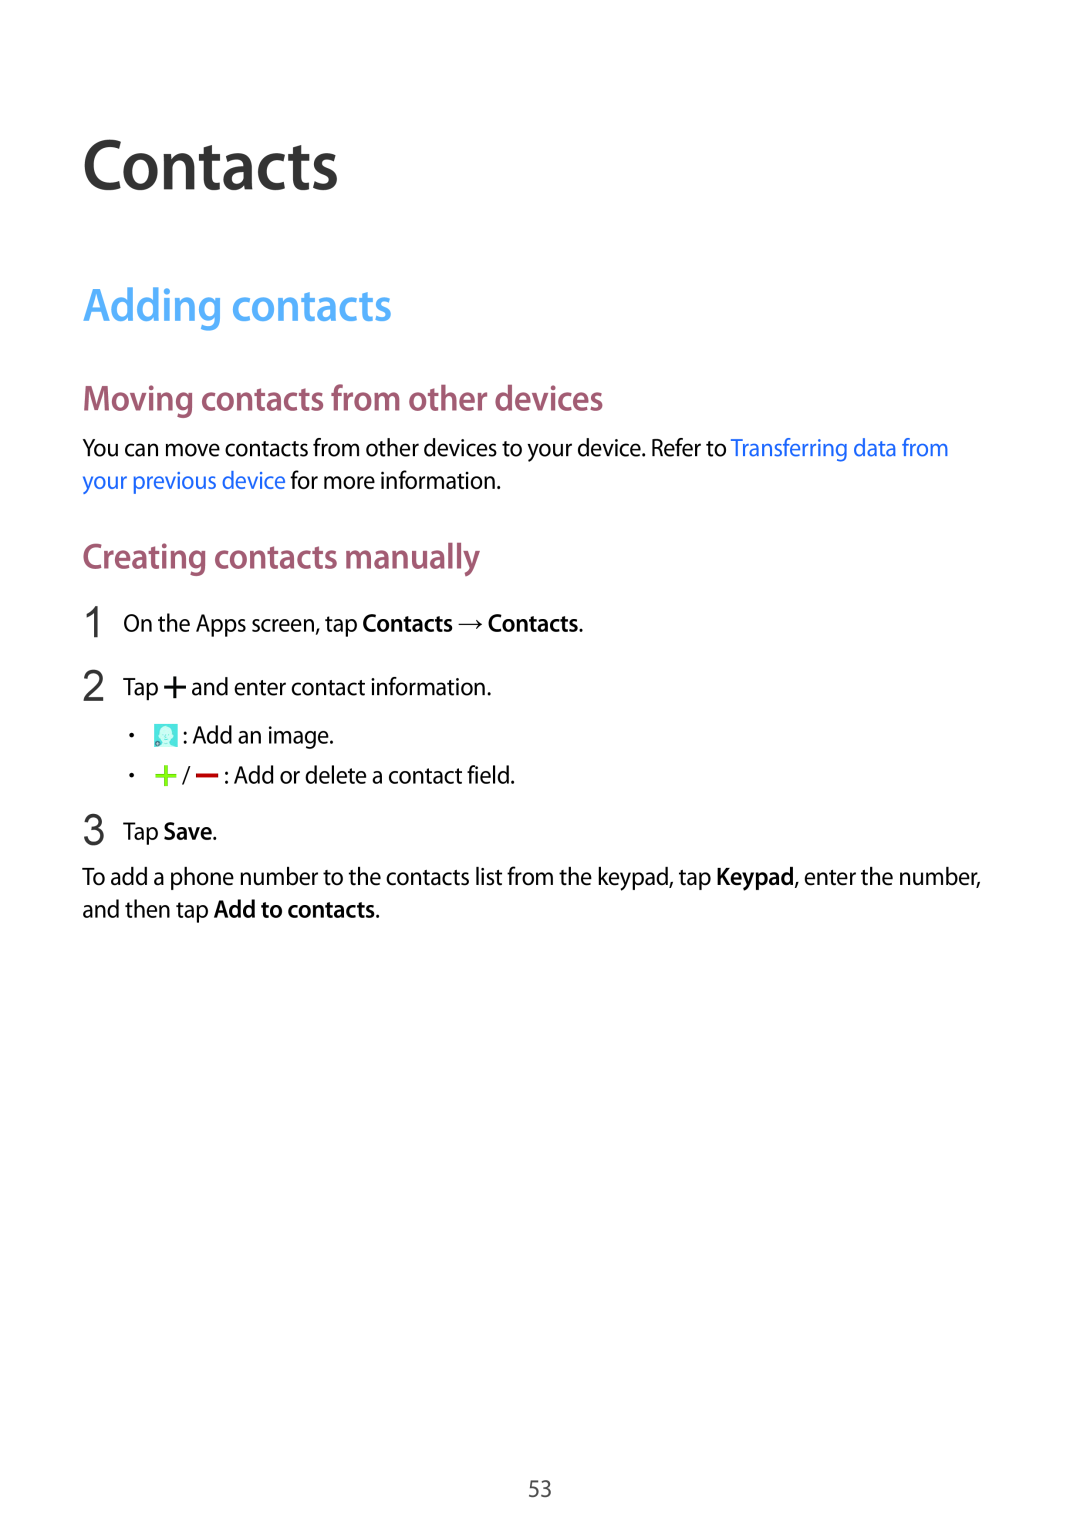 Samsung SM2G357FZAZTMS Contacts, Adding contacts, Moving contacts from other devices, Creating contacts manually 